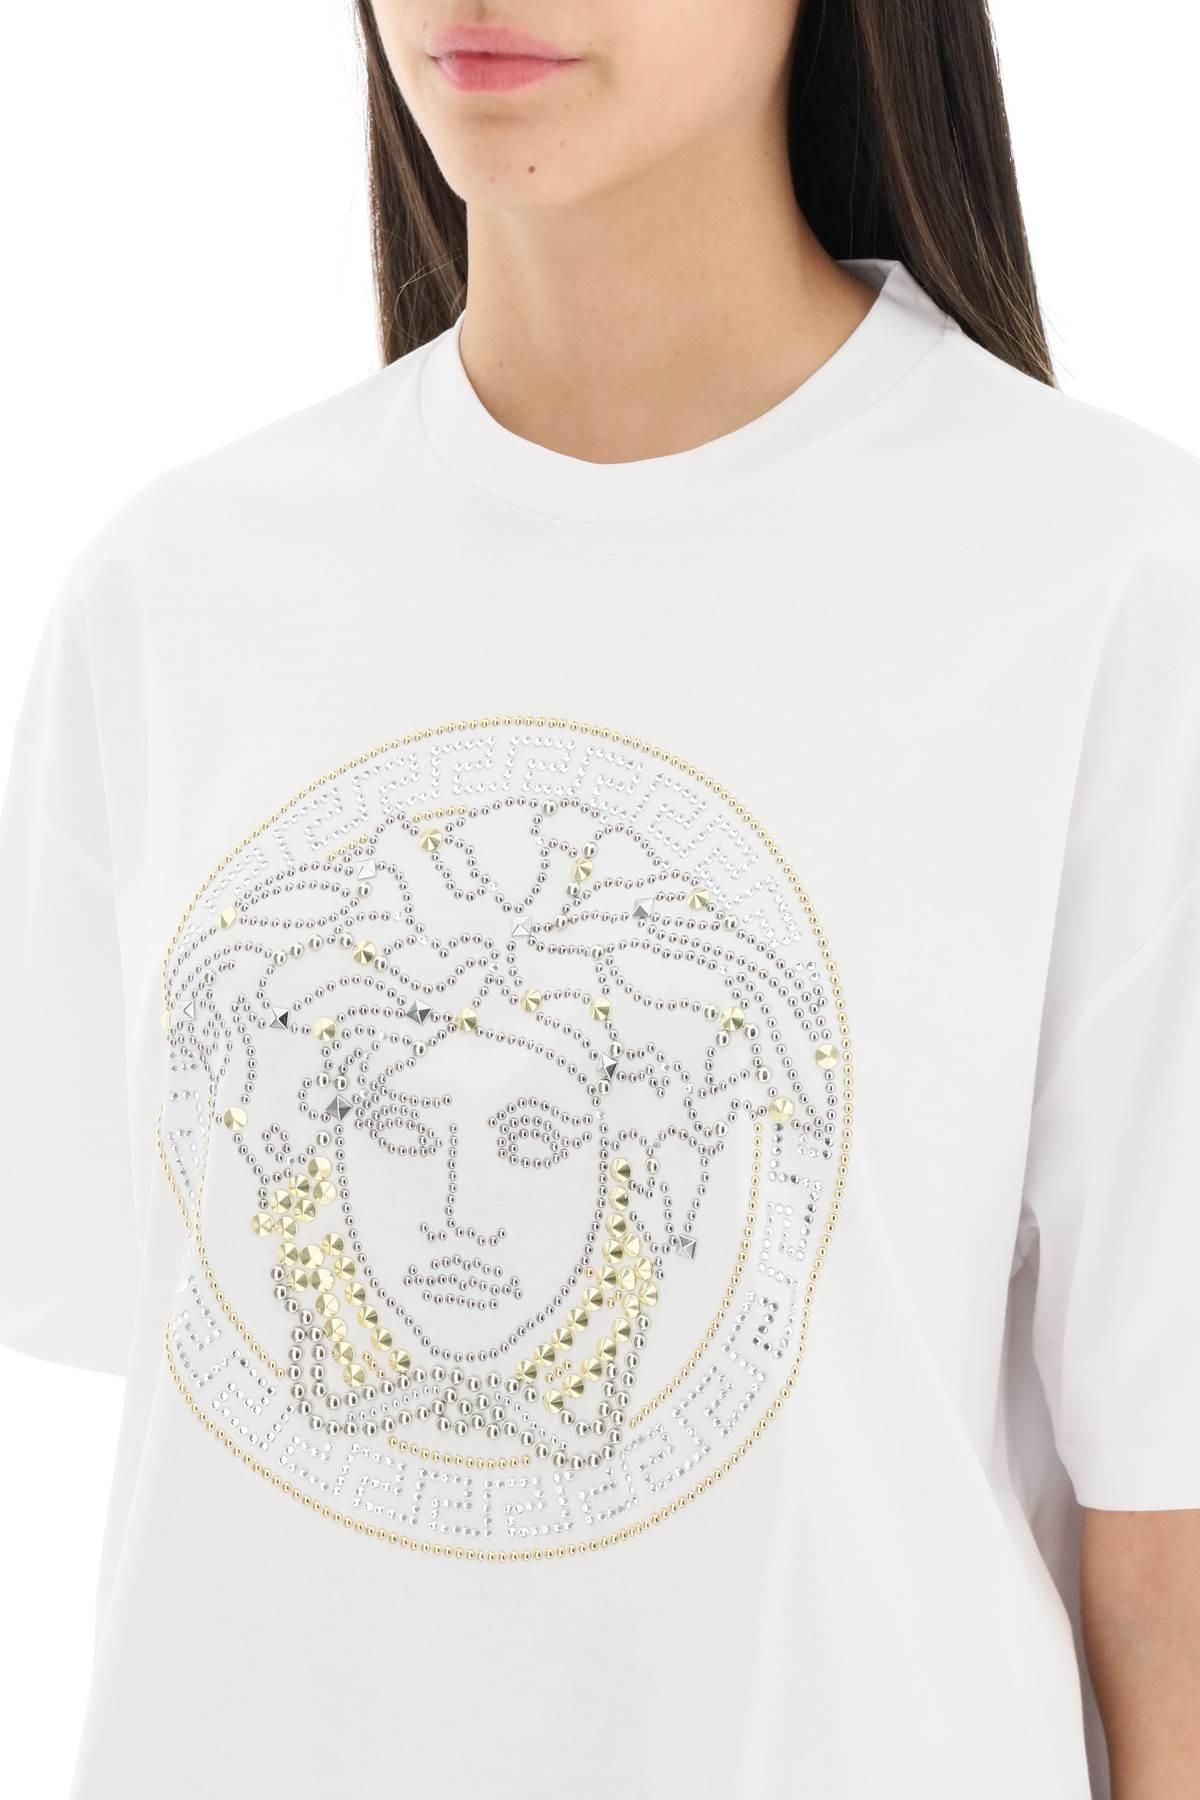 Versace Medusa T-shirt With Appliques in White | Lyst